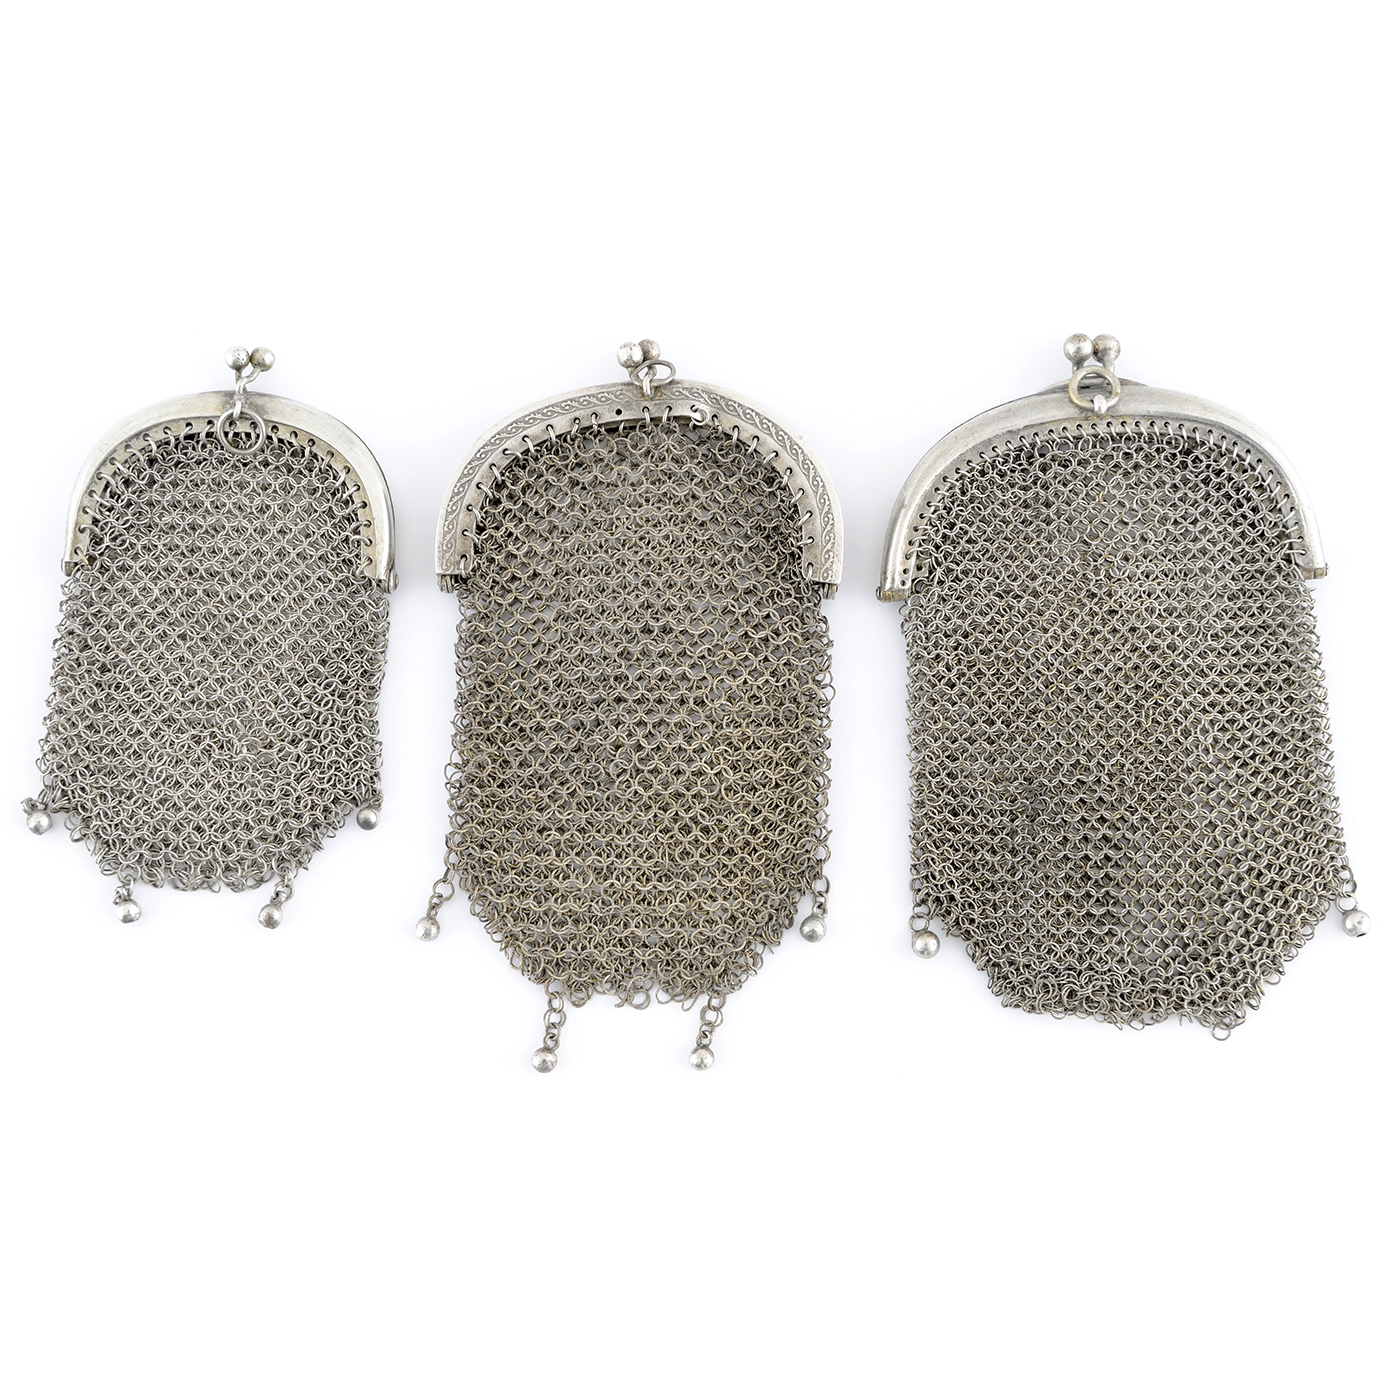 SET OF BAGS IN ANTIQUE SILVER